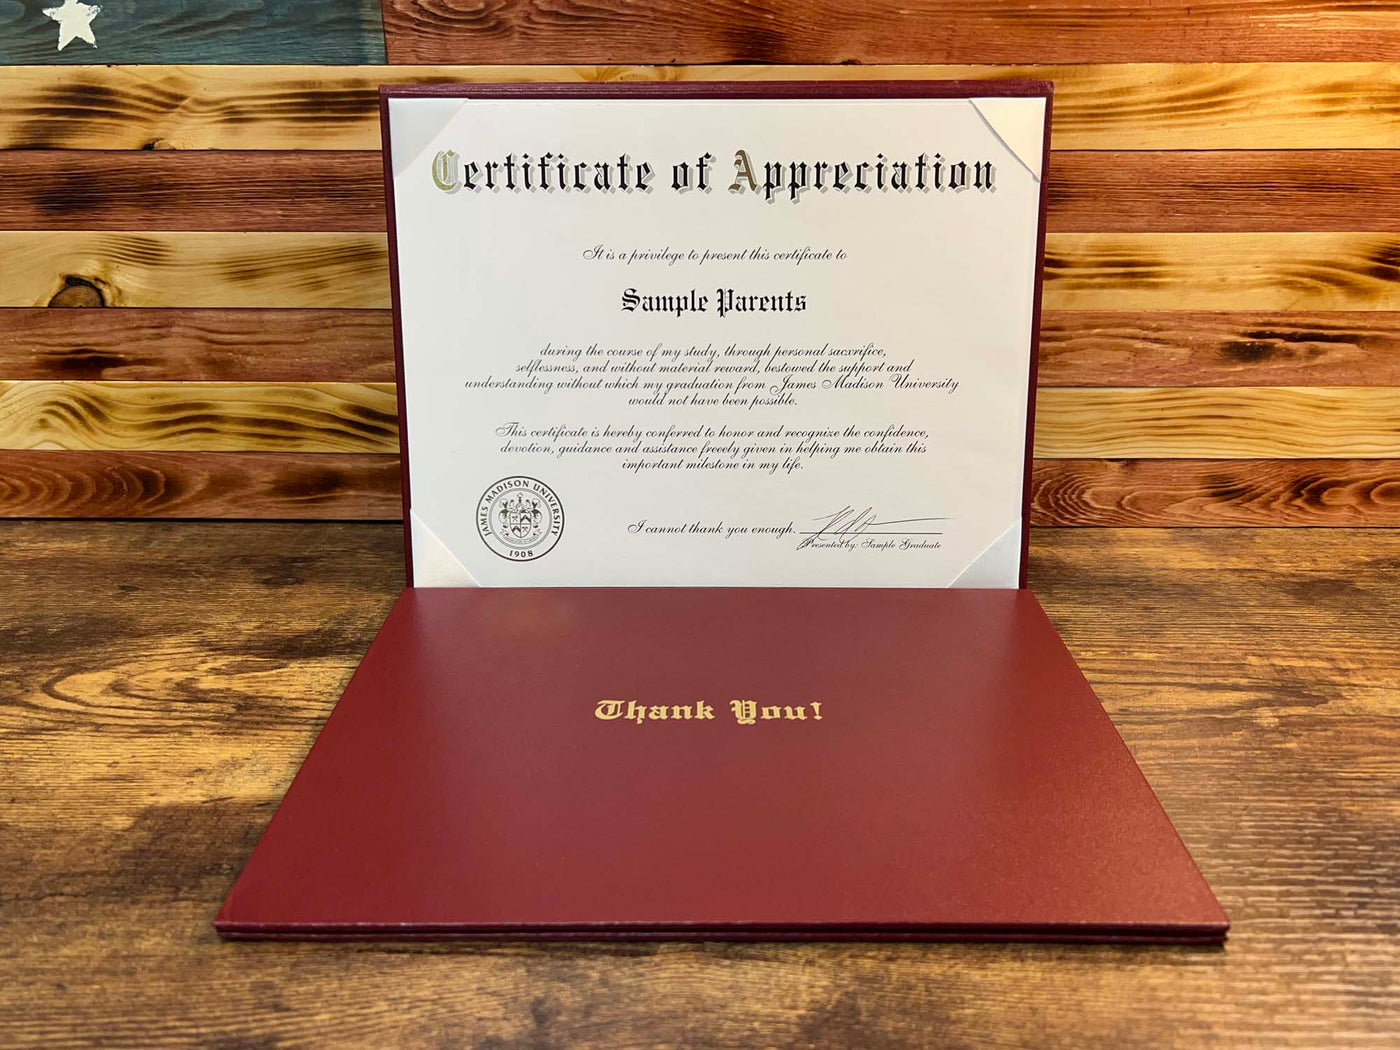 Certificate of Appreciation: Thank You For Your Support